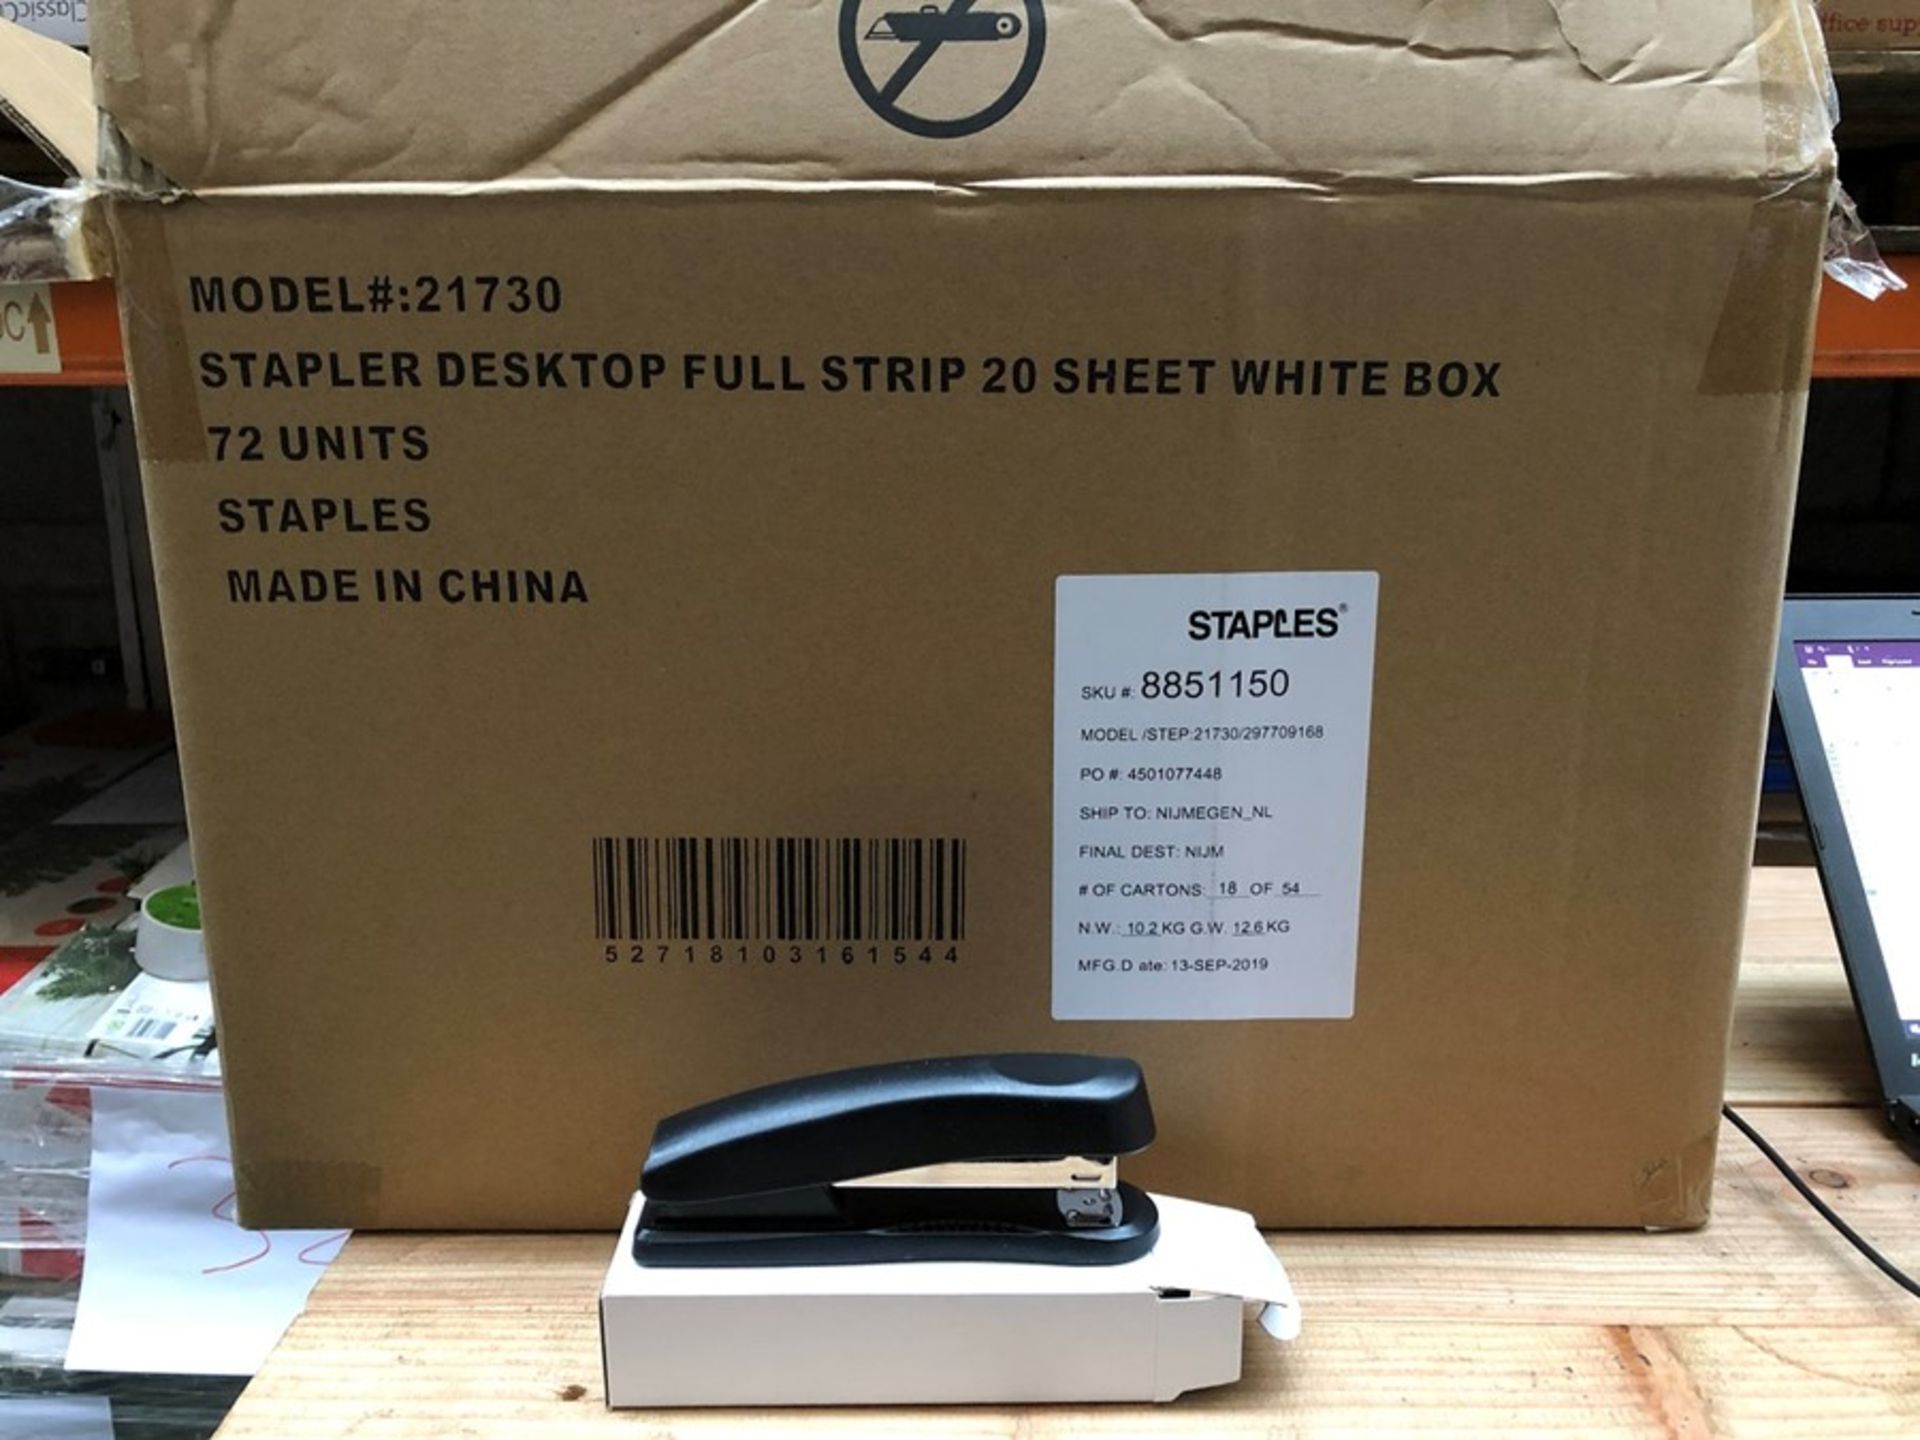 1 BOX TO CONTAIN 72 UNITS OF STAPLERS - BLACK (SOLD AS SEEN)